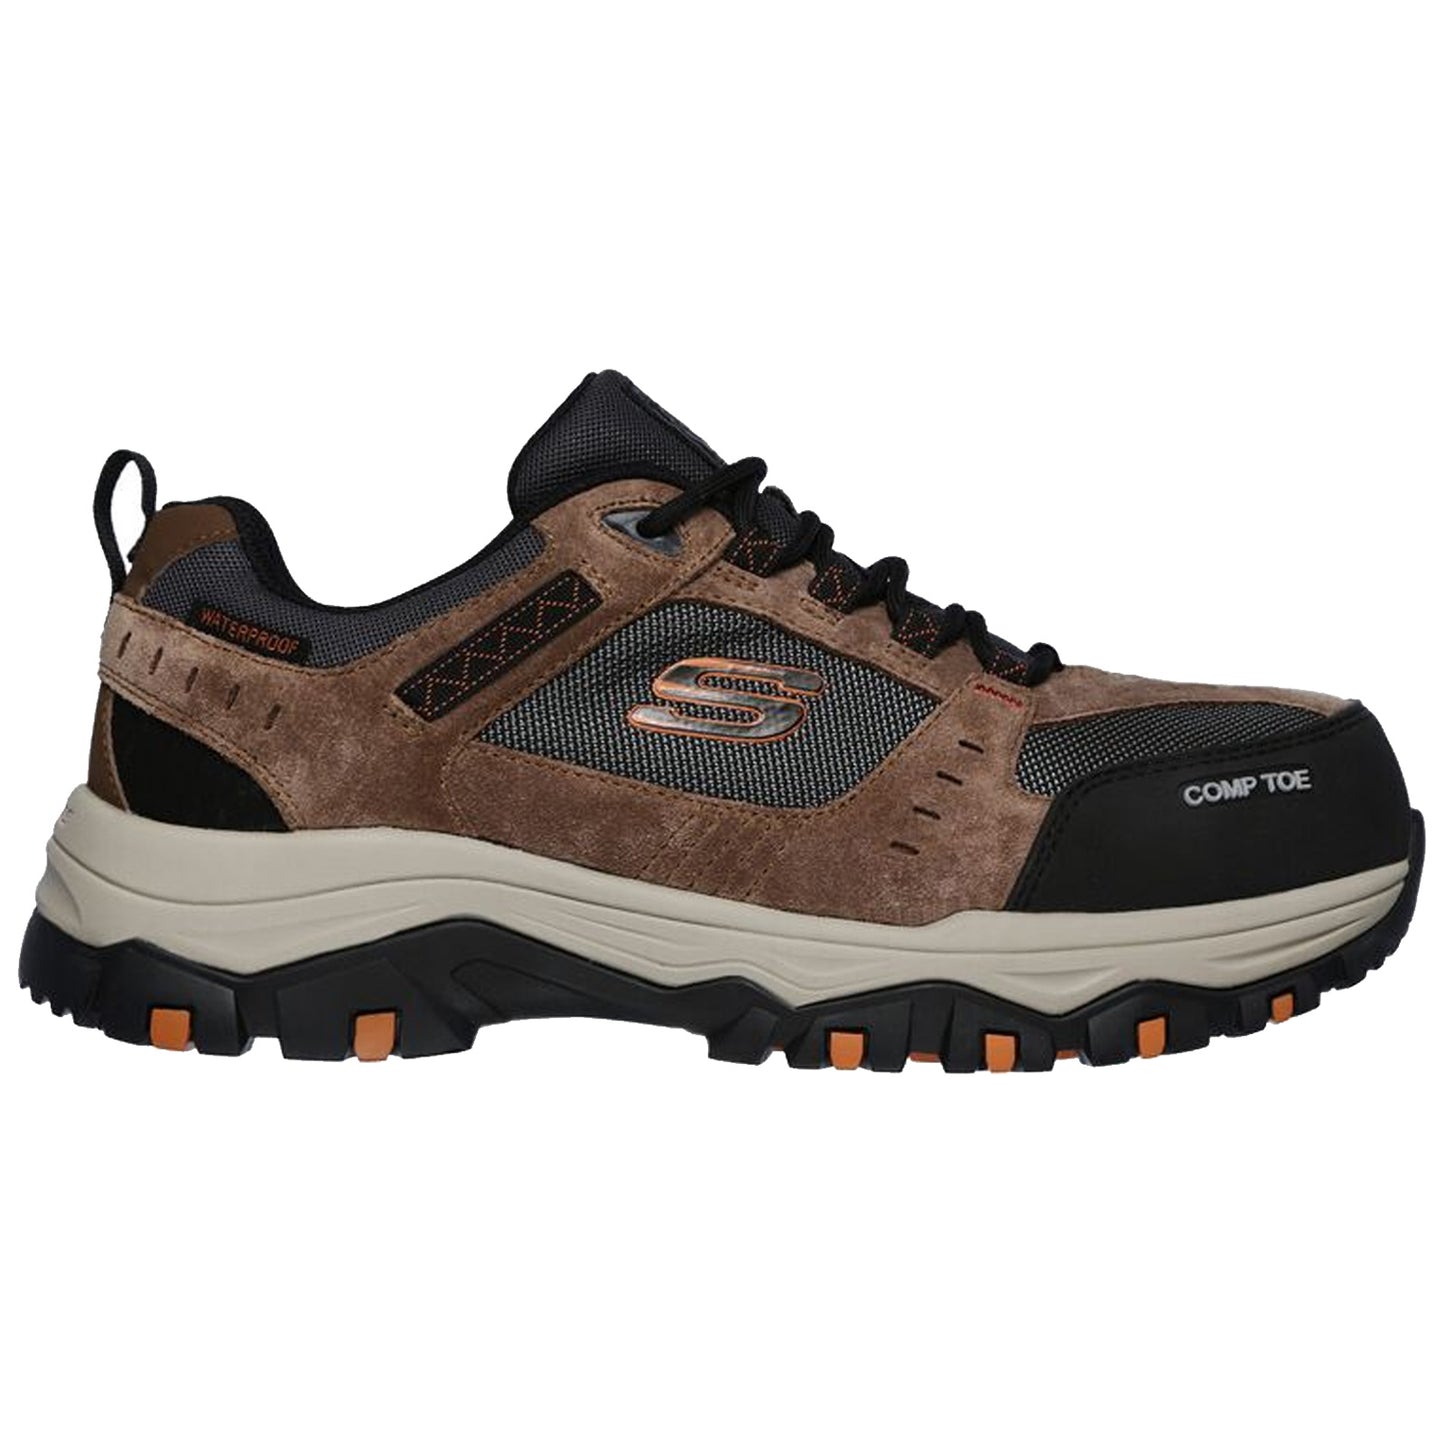 Skechers Mens Work Greetah Composite Toe Safety Shoes